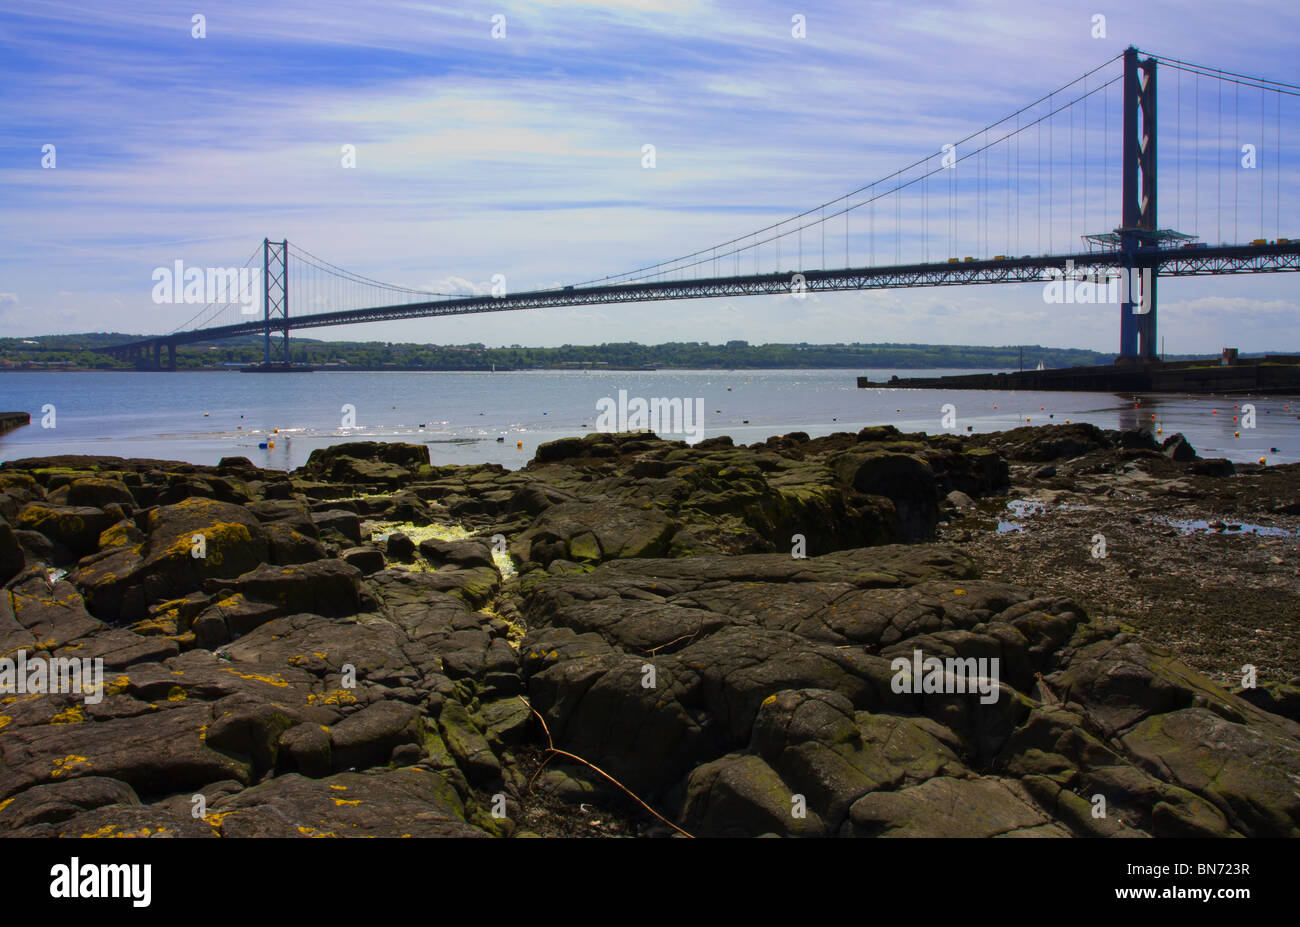 North Queensferry in fife next to the firth of forth where the famous road and rail bridges cross from Edinburgh. Stock Photo